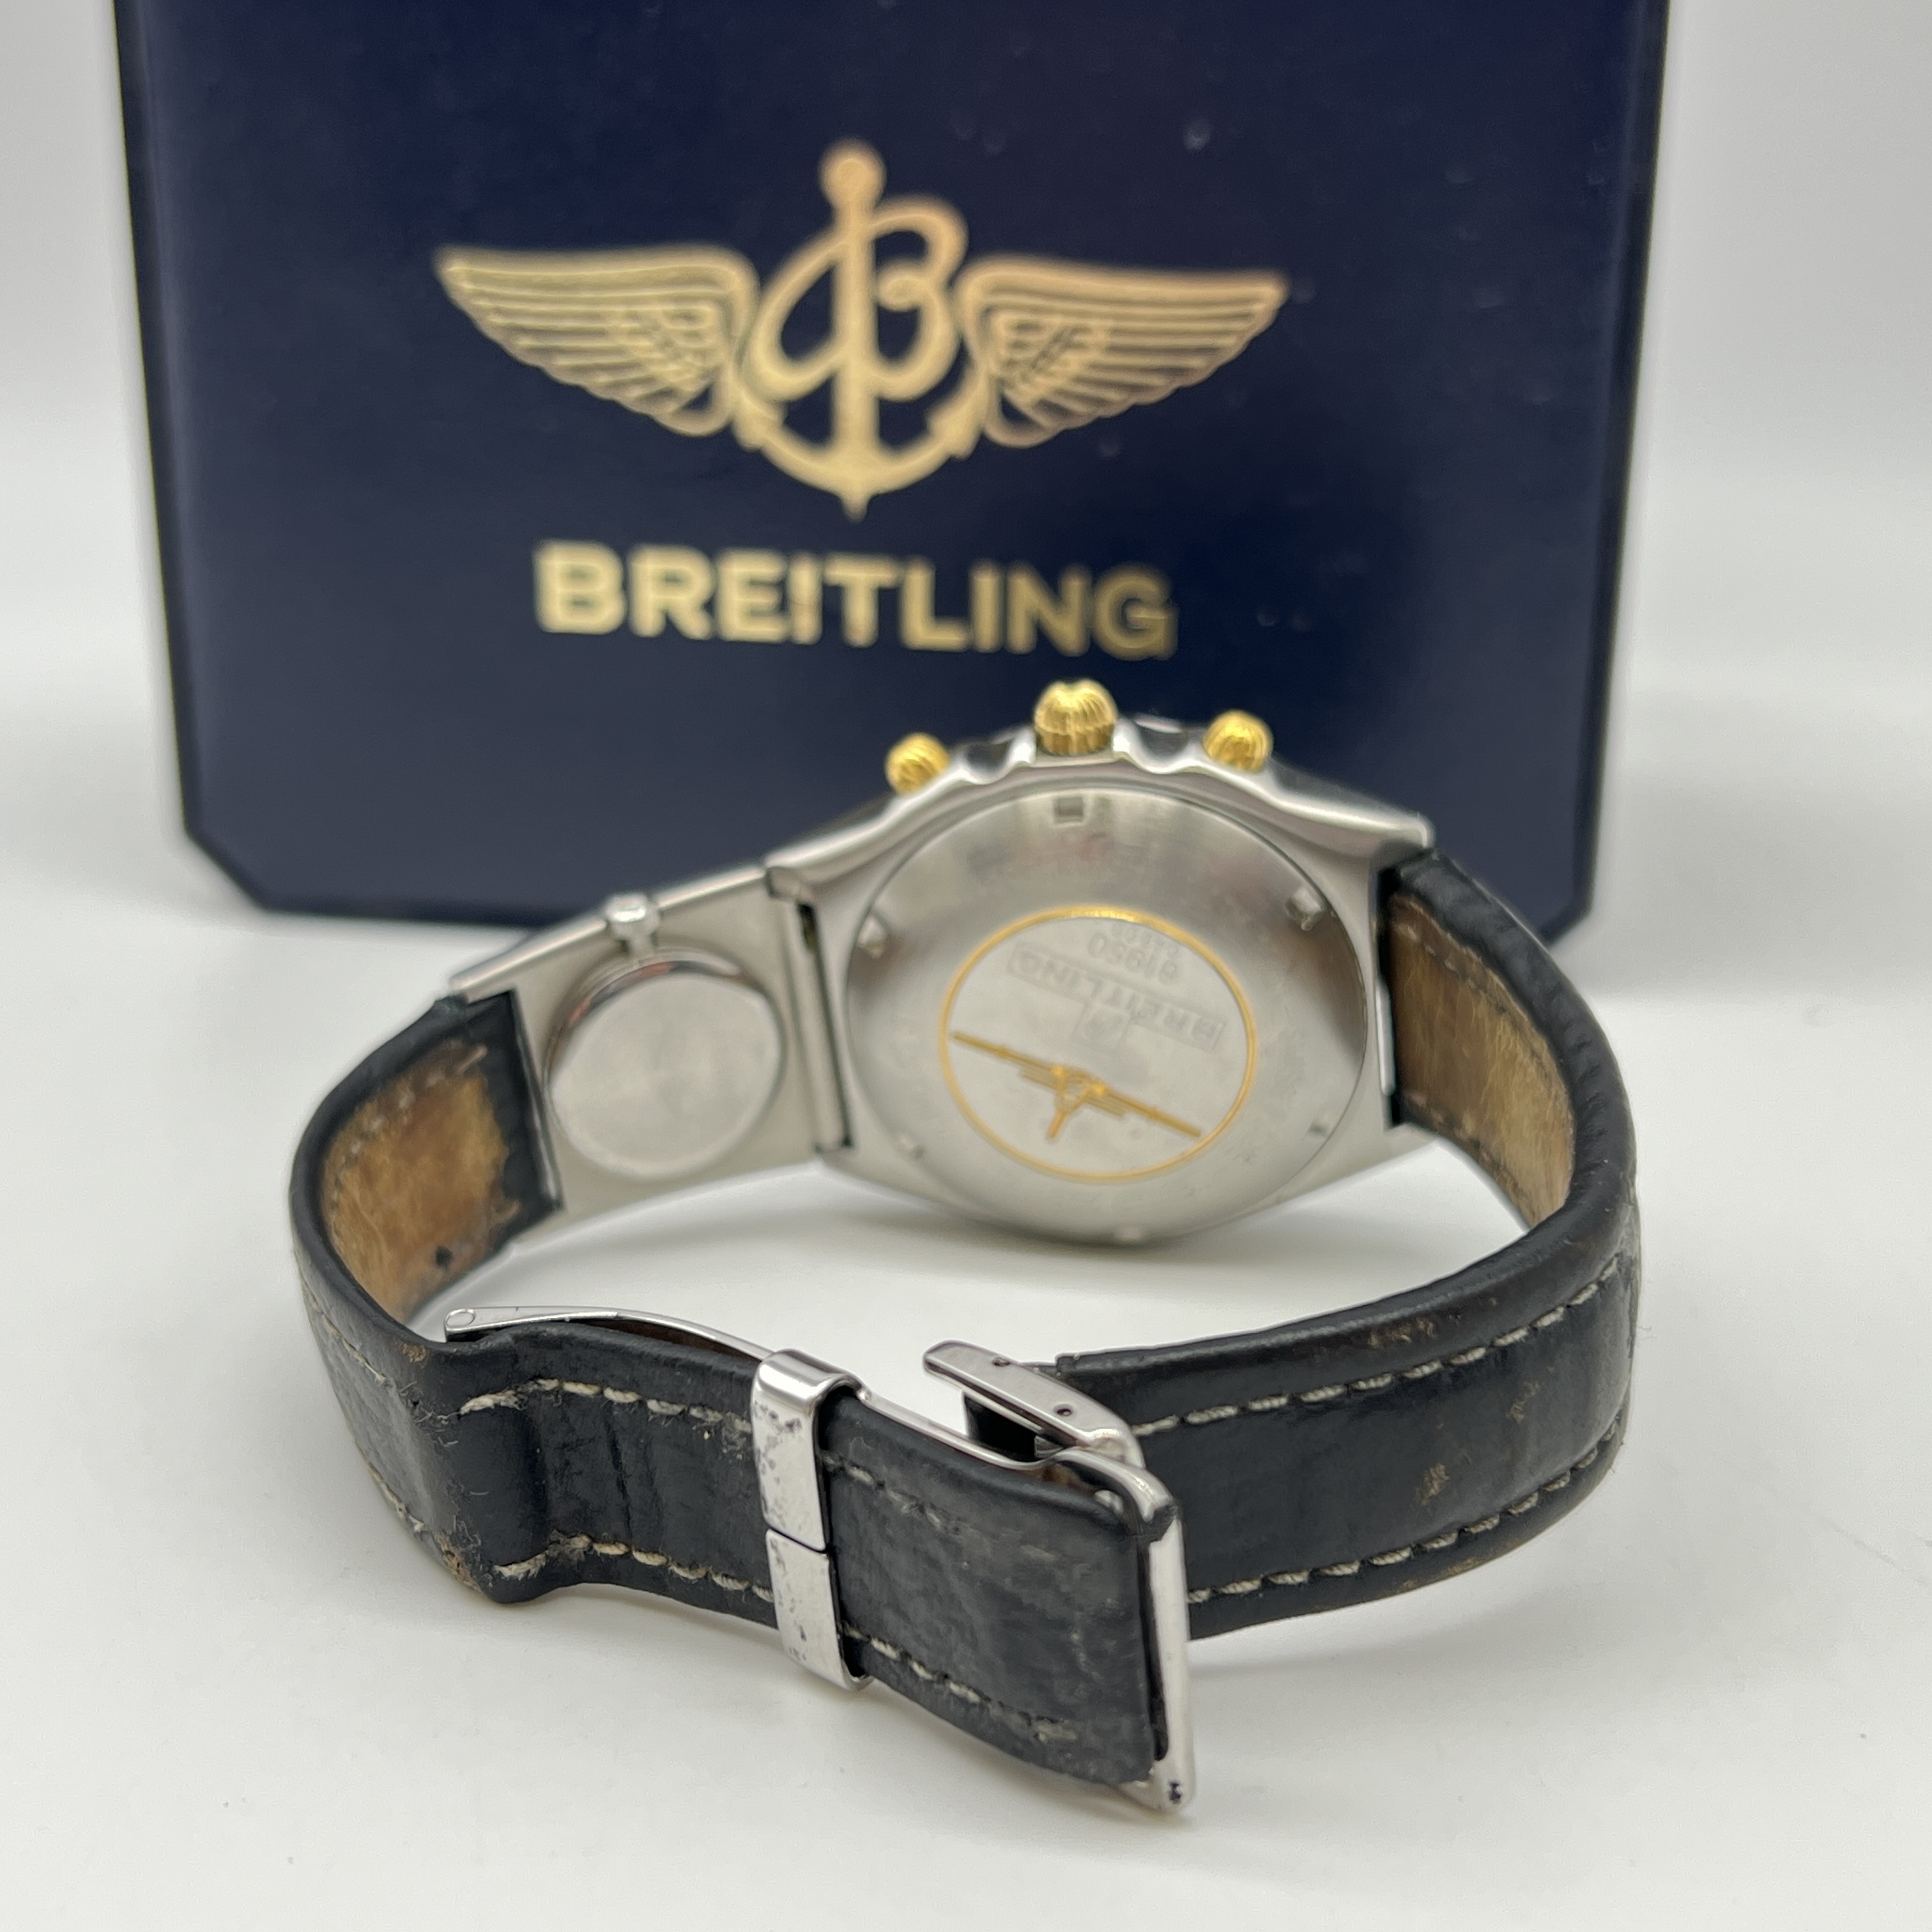 A Breitling chronograph stainless steel and gold watch - Image 8 of 11